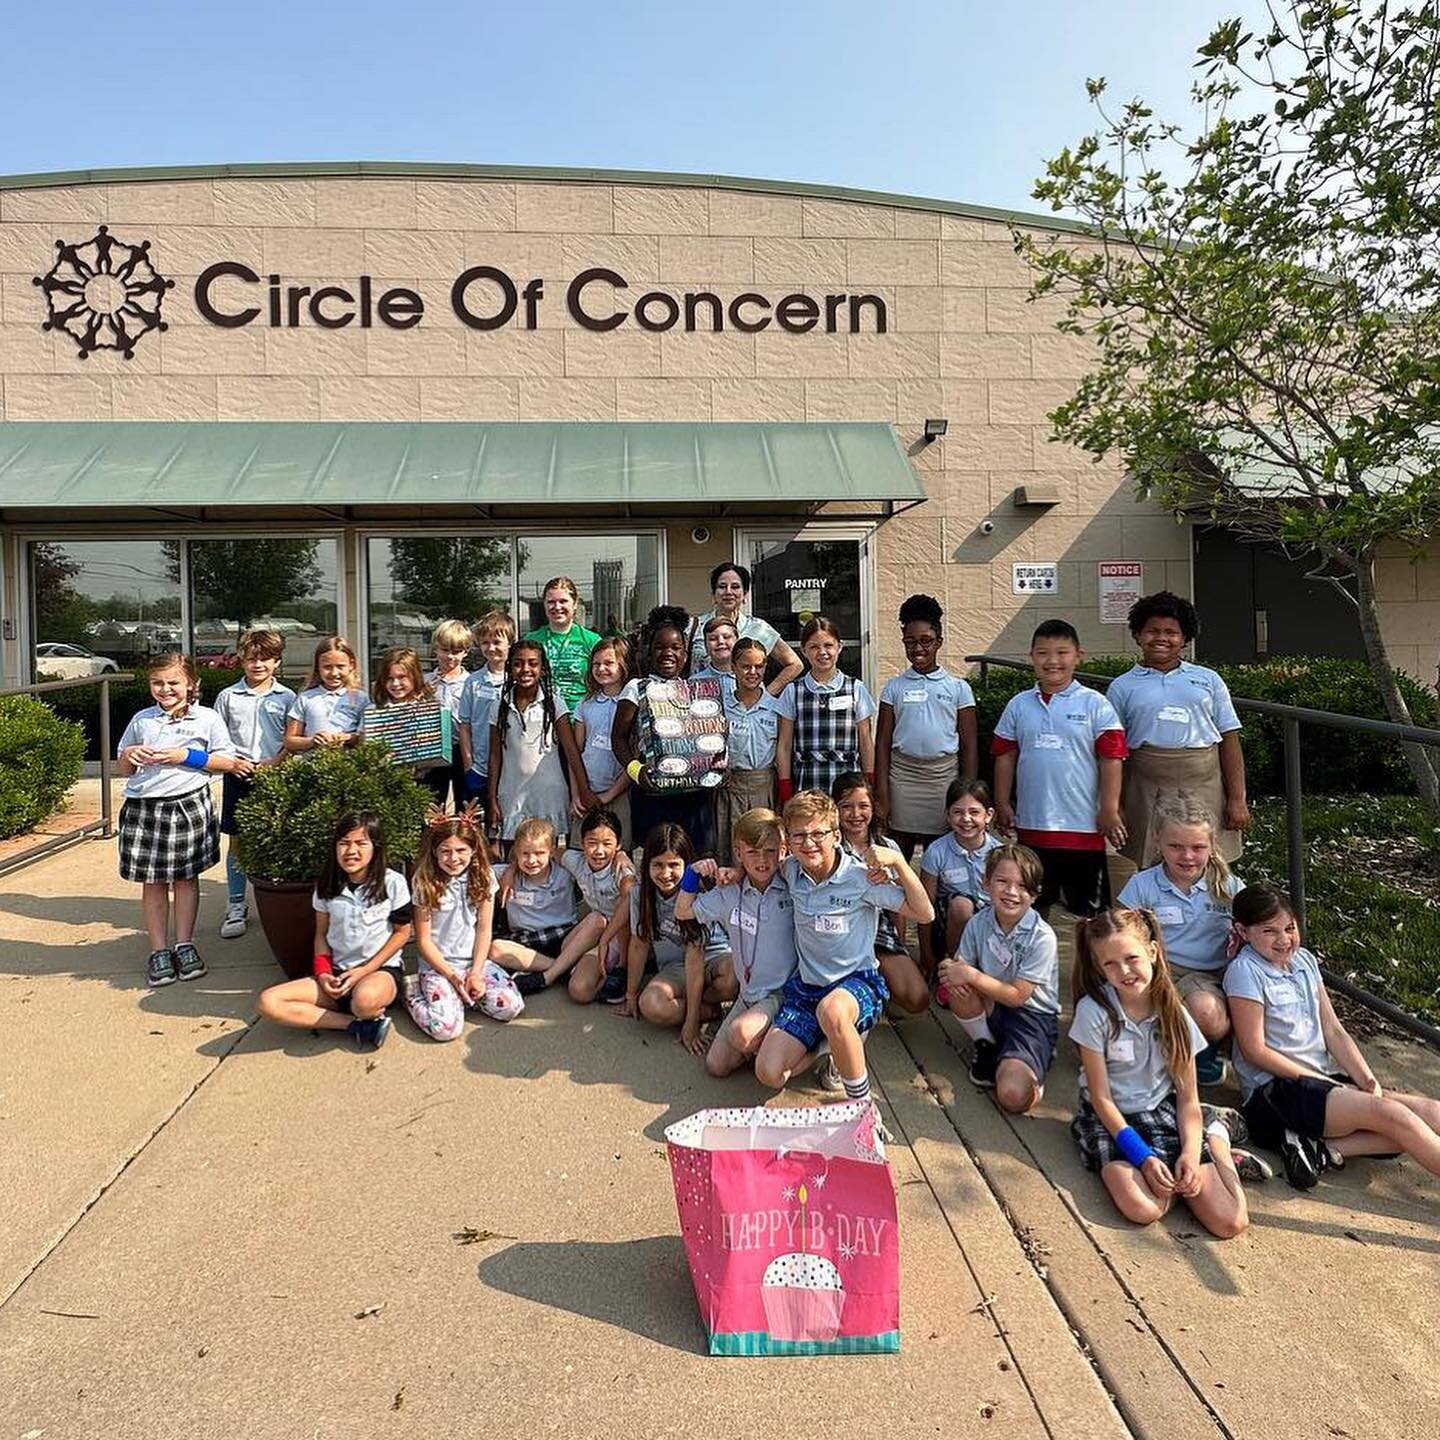 Every child deserves to celebrate their birthday and our 2nd graders helped make that happen! 

In partnership with Circle of Concern Food Pantry, students donated birthday bags filled with cake mix, candles, and decorations for low income families i